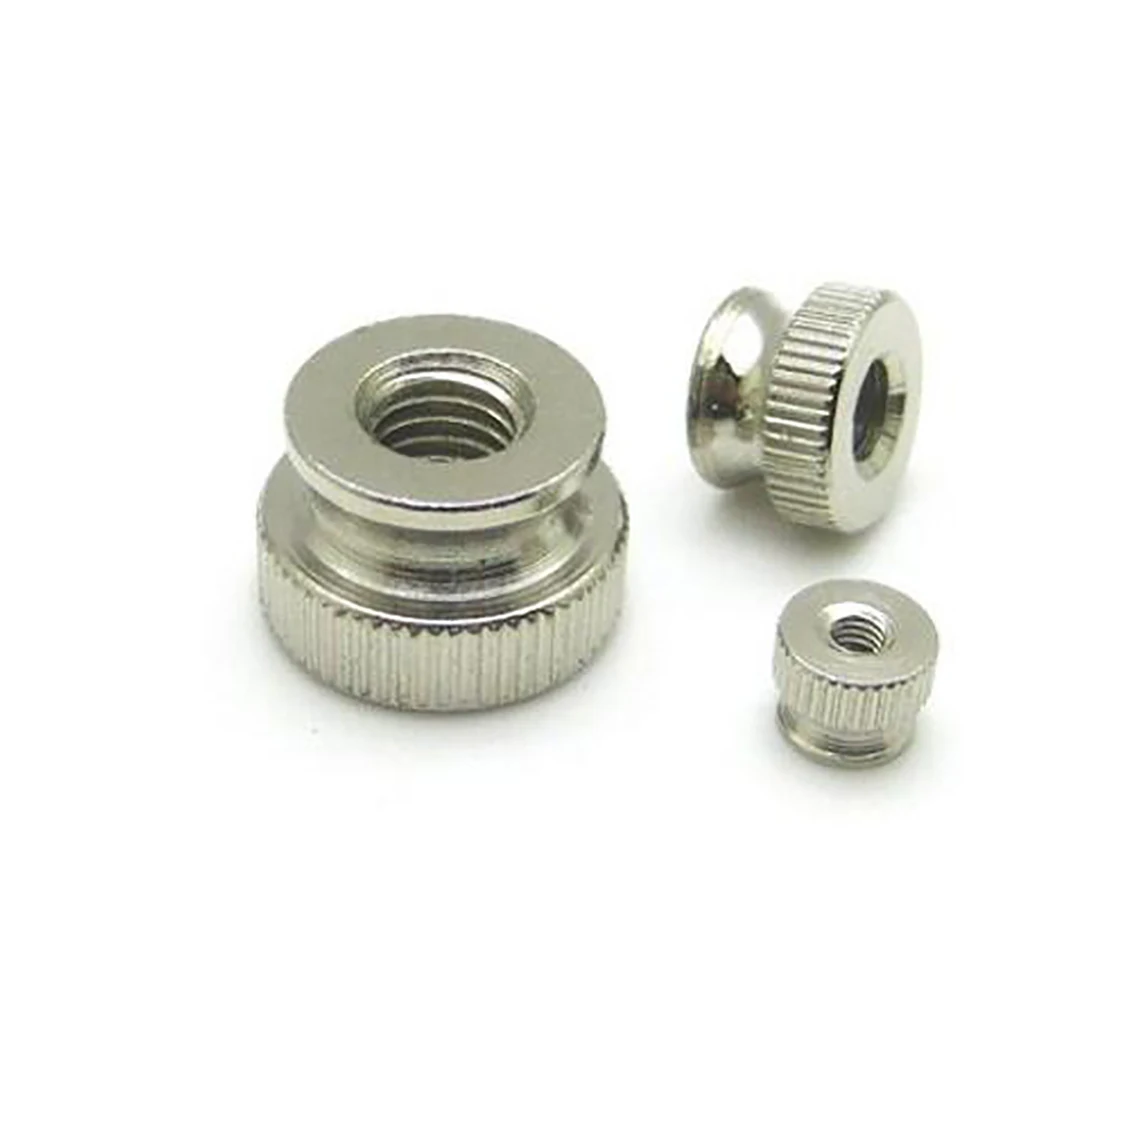 M6/8/10/12 Aluminium Blind Hole Knurled Thumb Nuts With Side Hand Grip Knobs Nut